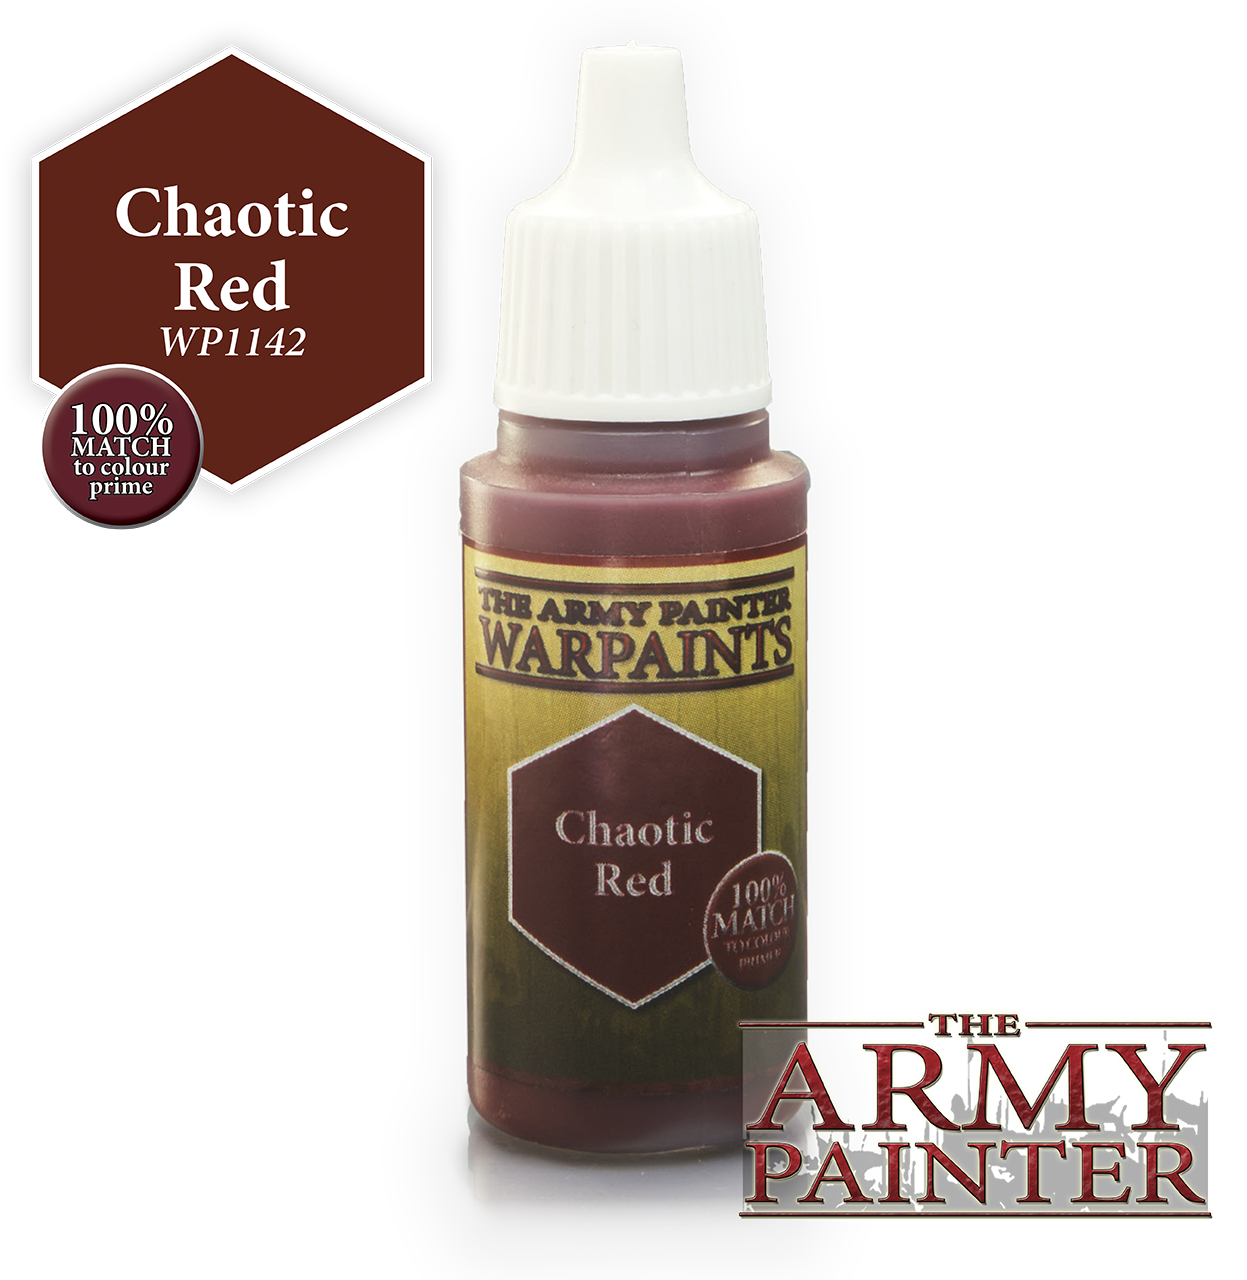 Over the Brick – The Army Painter Colour Primer - Chaotic Red